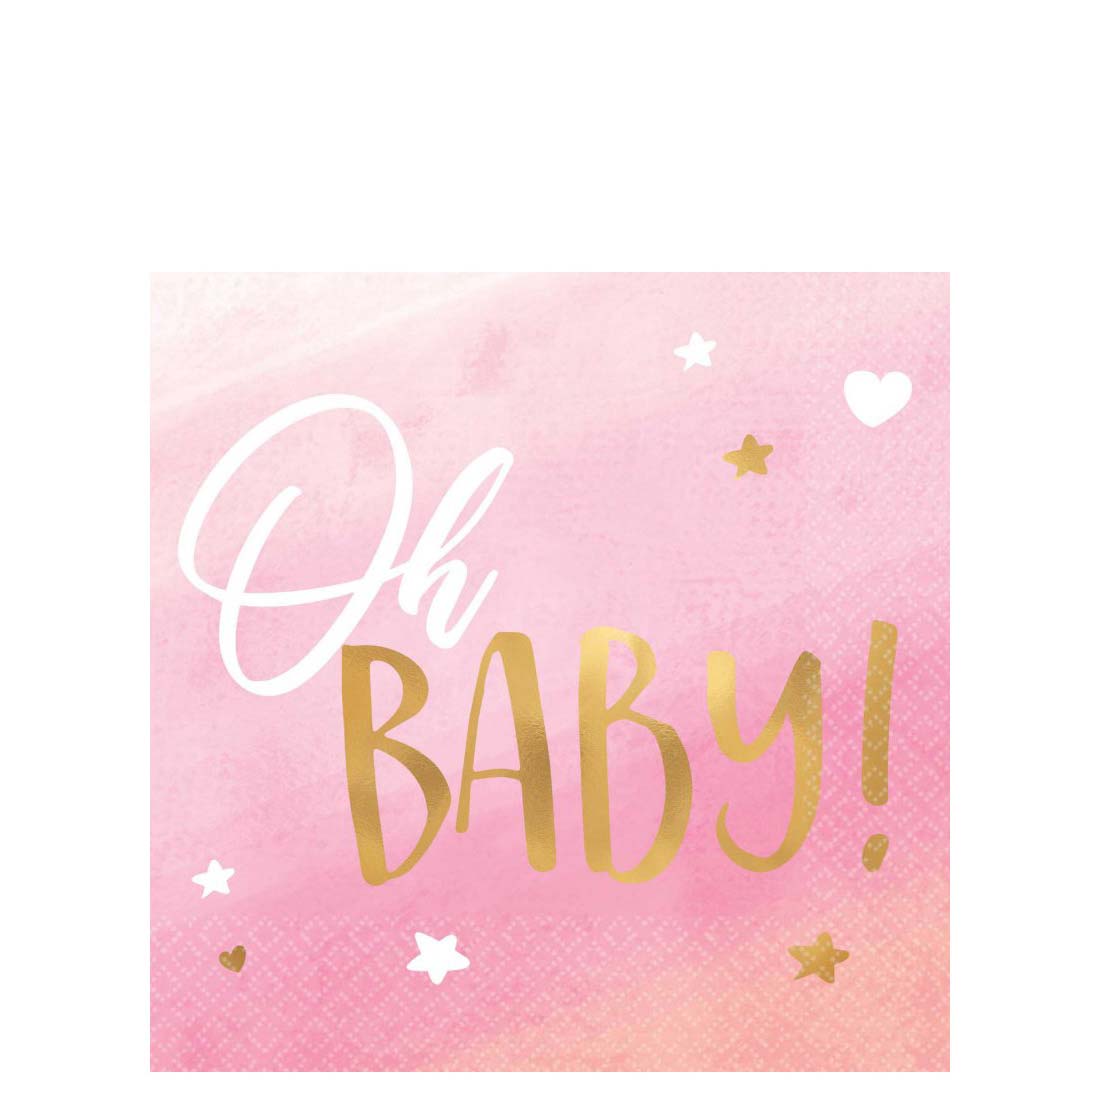 Oh Baby Girl Hot Stamped Beverage Napkin 16pcs Printed Tableware - Party Centre